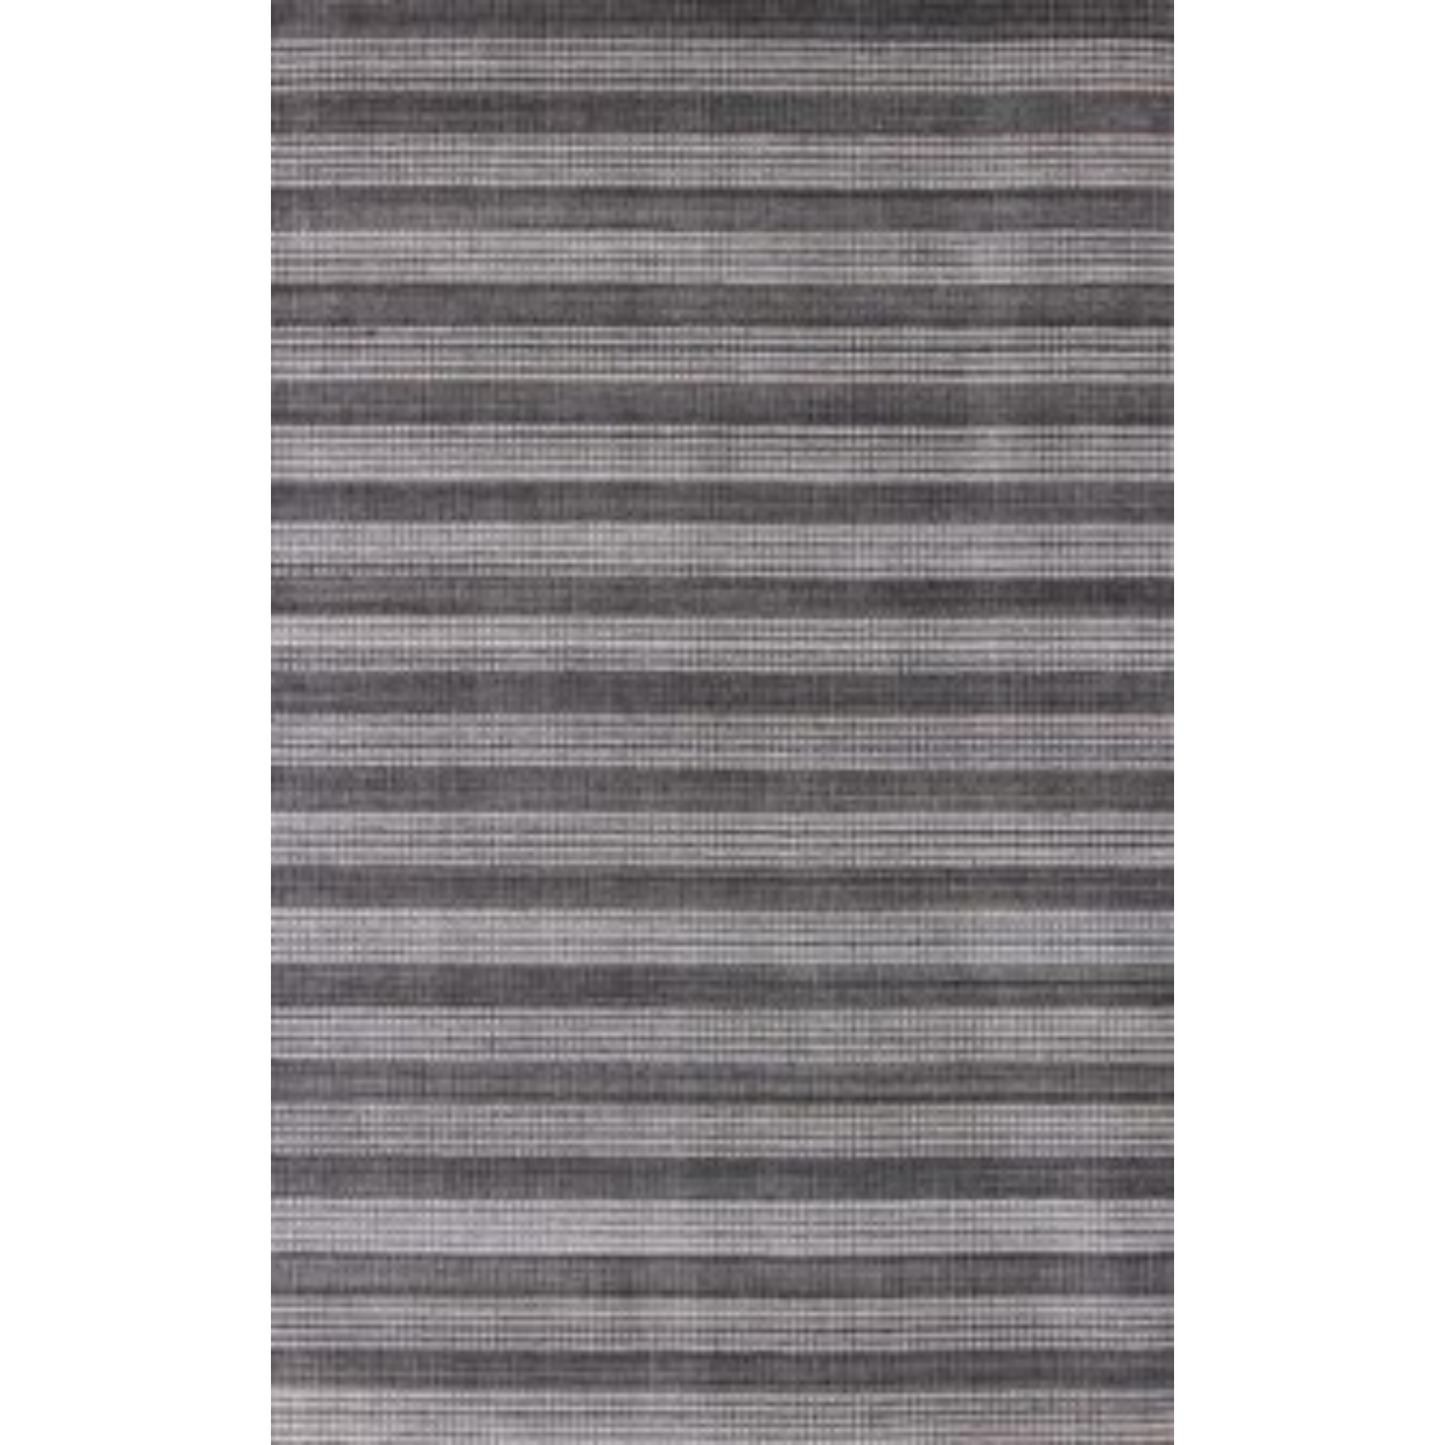 5' X 8' Dark Grey And White Striped Hand Loomed Area Rug